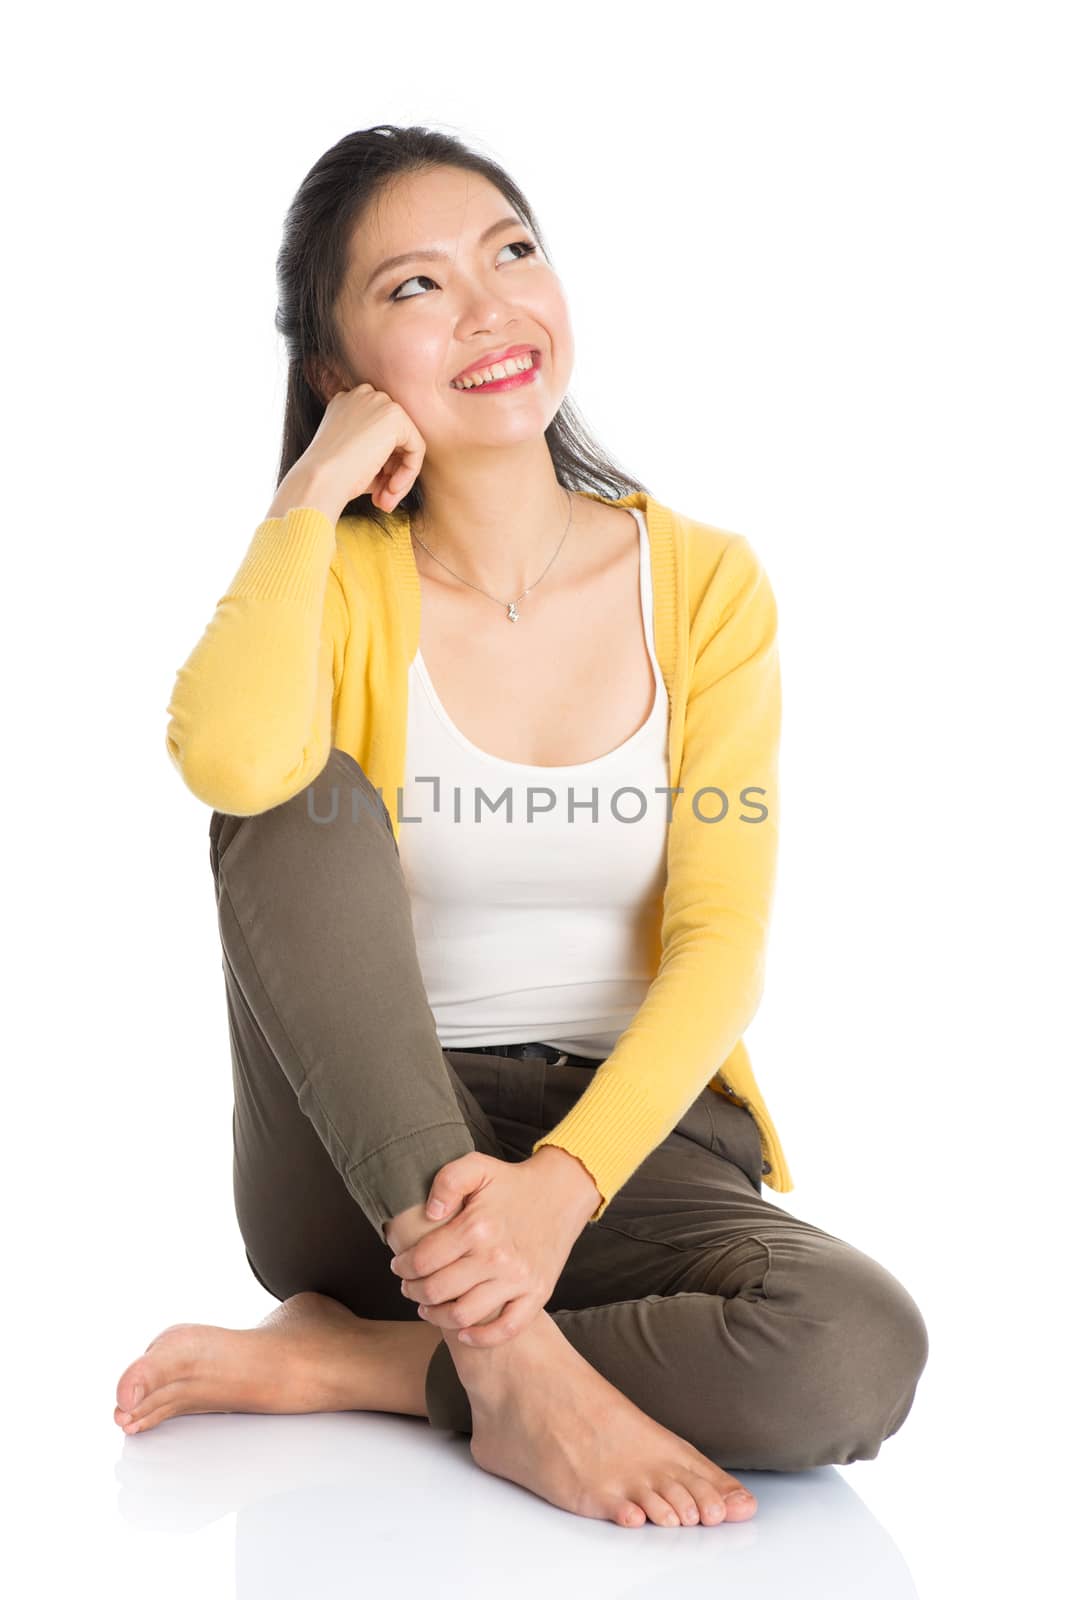 Full length pensive Asian girl sitting on floor smiling and thinking, looking upward, isolated on white background.